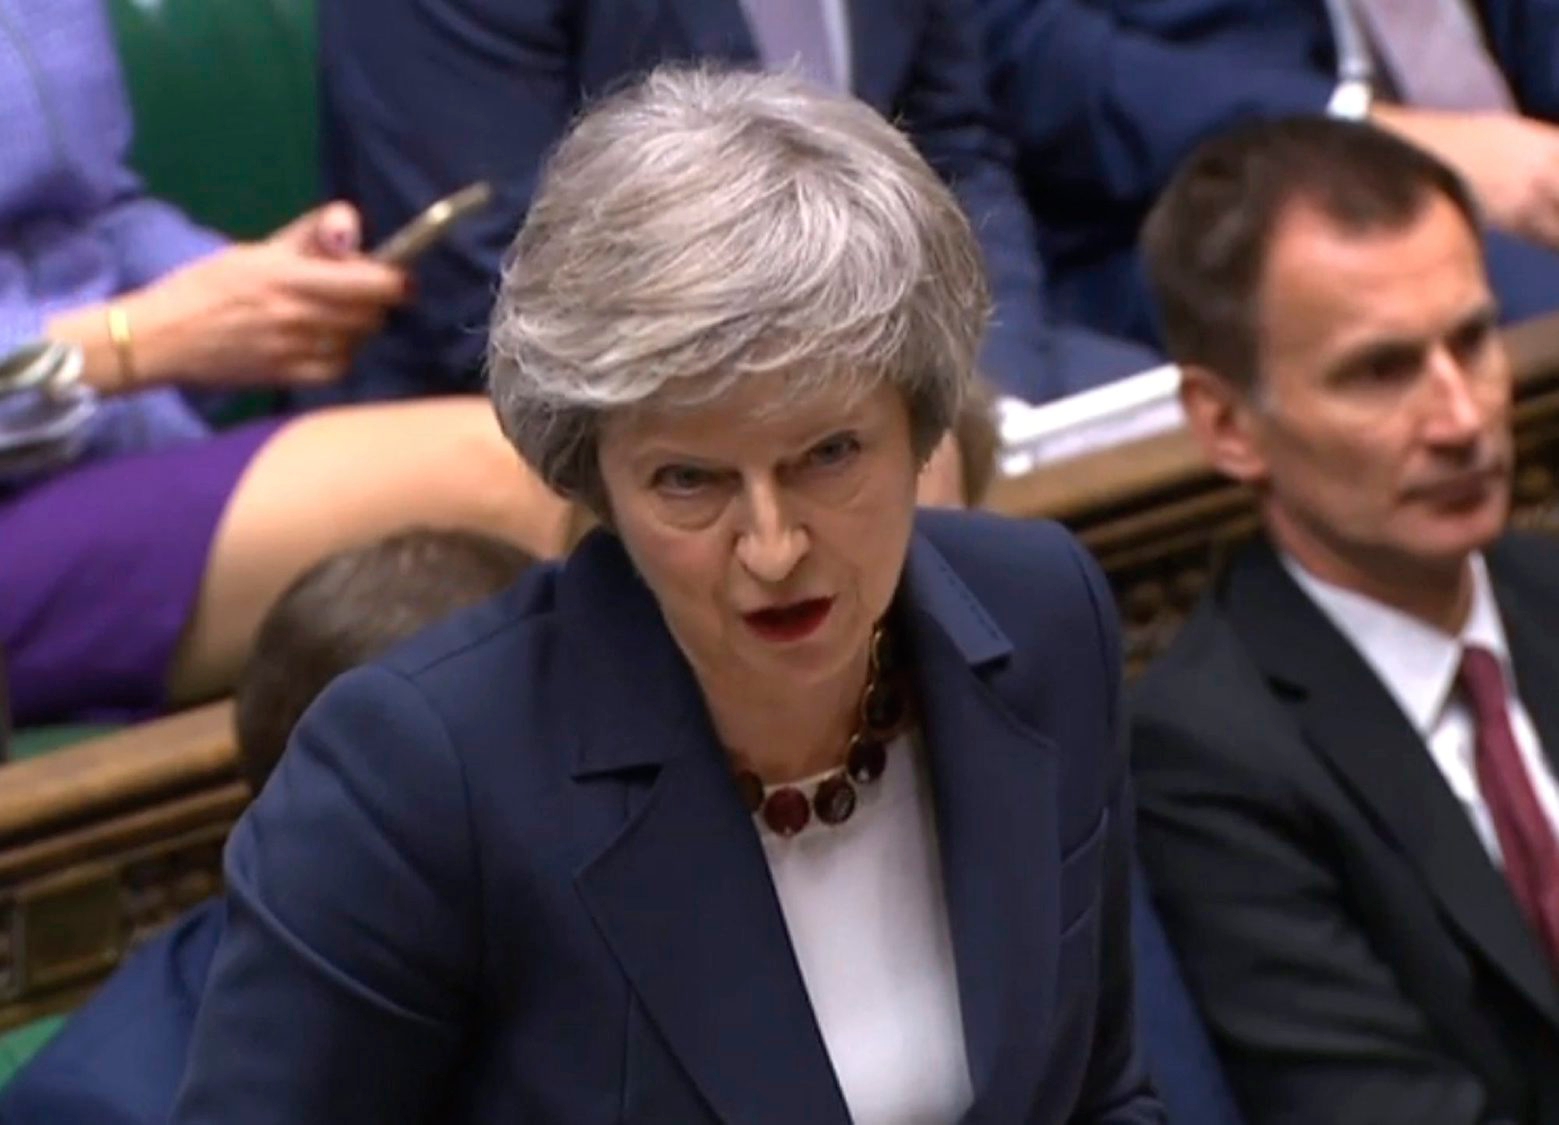 In this grab taken from video, Britain's Prime Minister Theresa May speaks during Prime Minister's Questions in the House of Commons, London, Wednesday, Jan. 9, 2019.  The British government brought its little-loved Brexit deal back to Parliament on Wednesday, a month after postponing a vote on the agreement to stave off near-certain defeat. (House of Commons/PA via AP) Britain Brexit